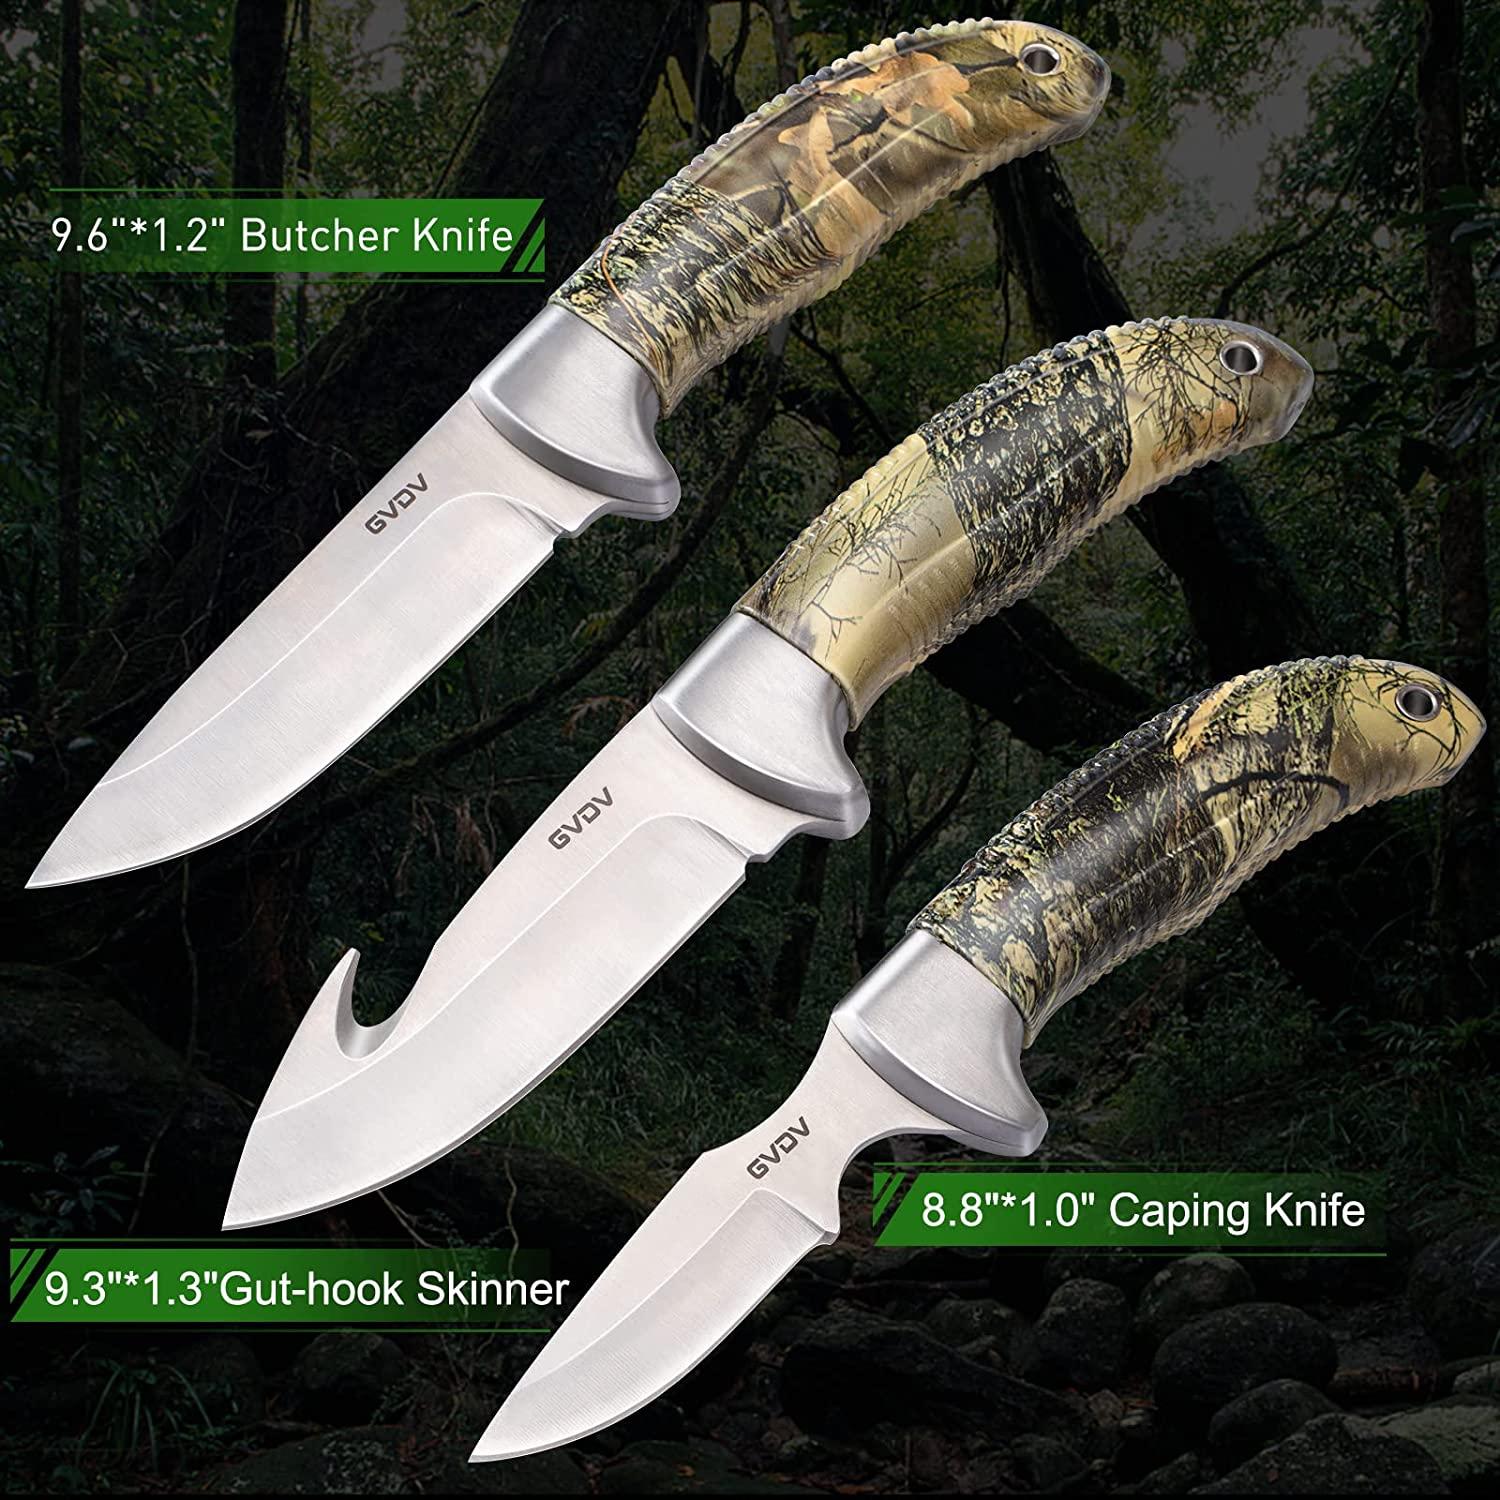 GVDV Hunting Knife Set - 14 Pieces, Portable Butcher Game